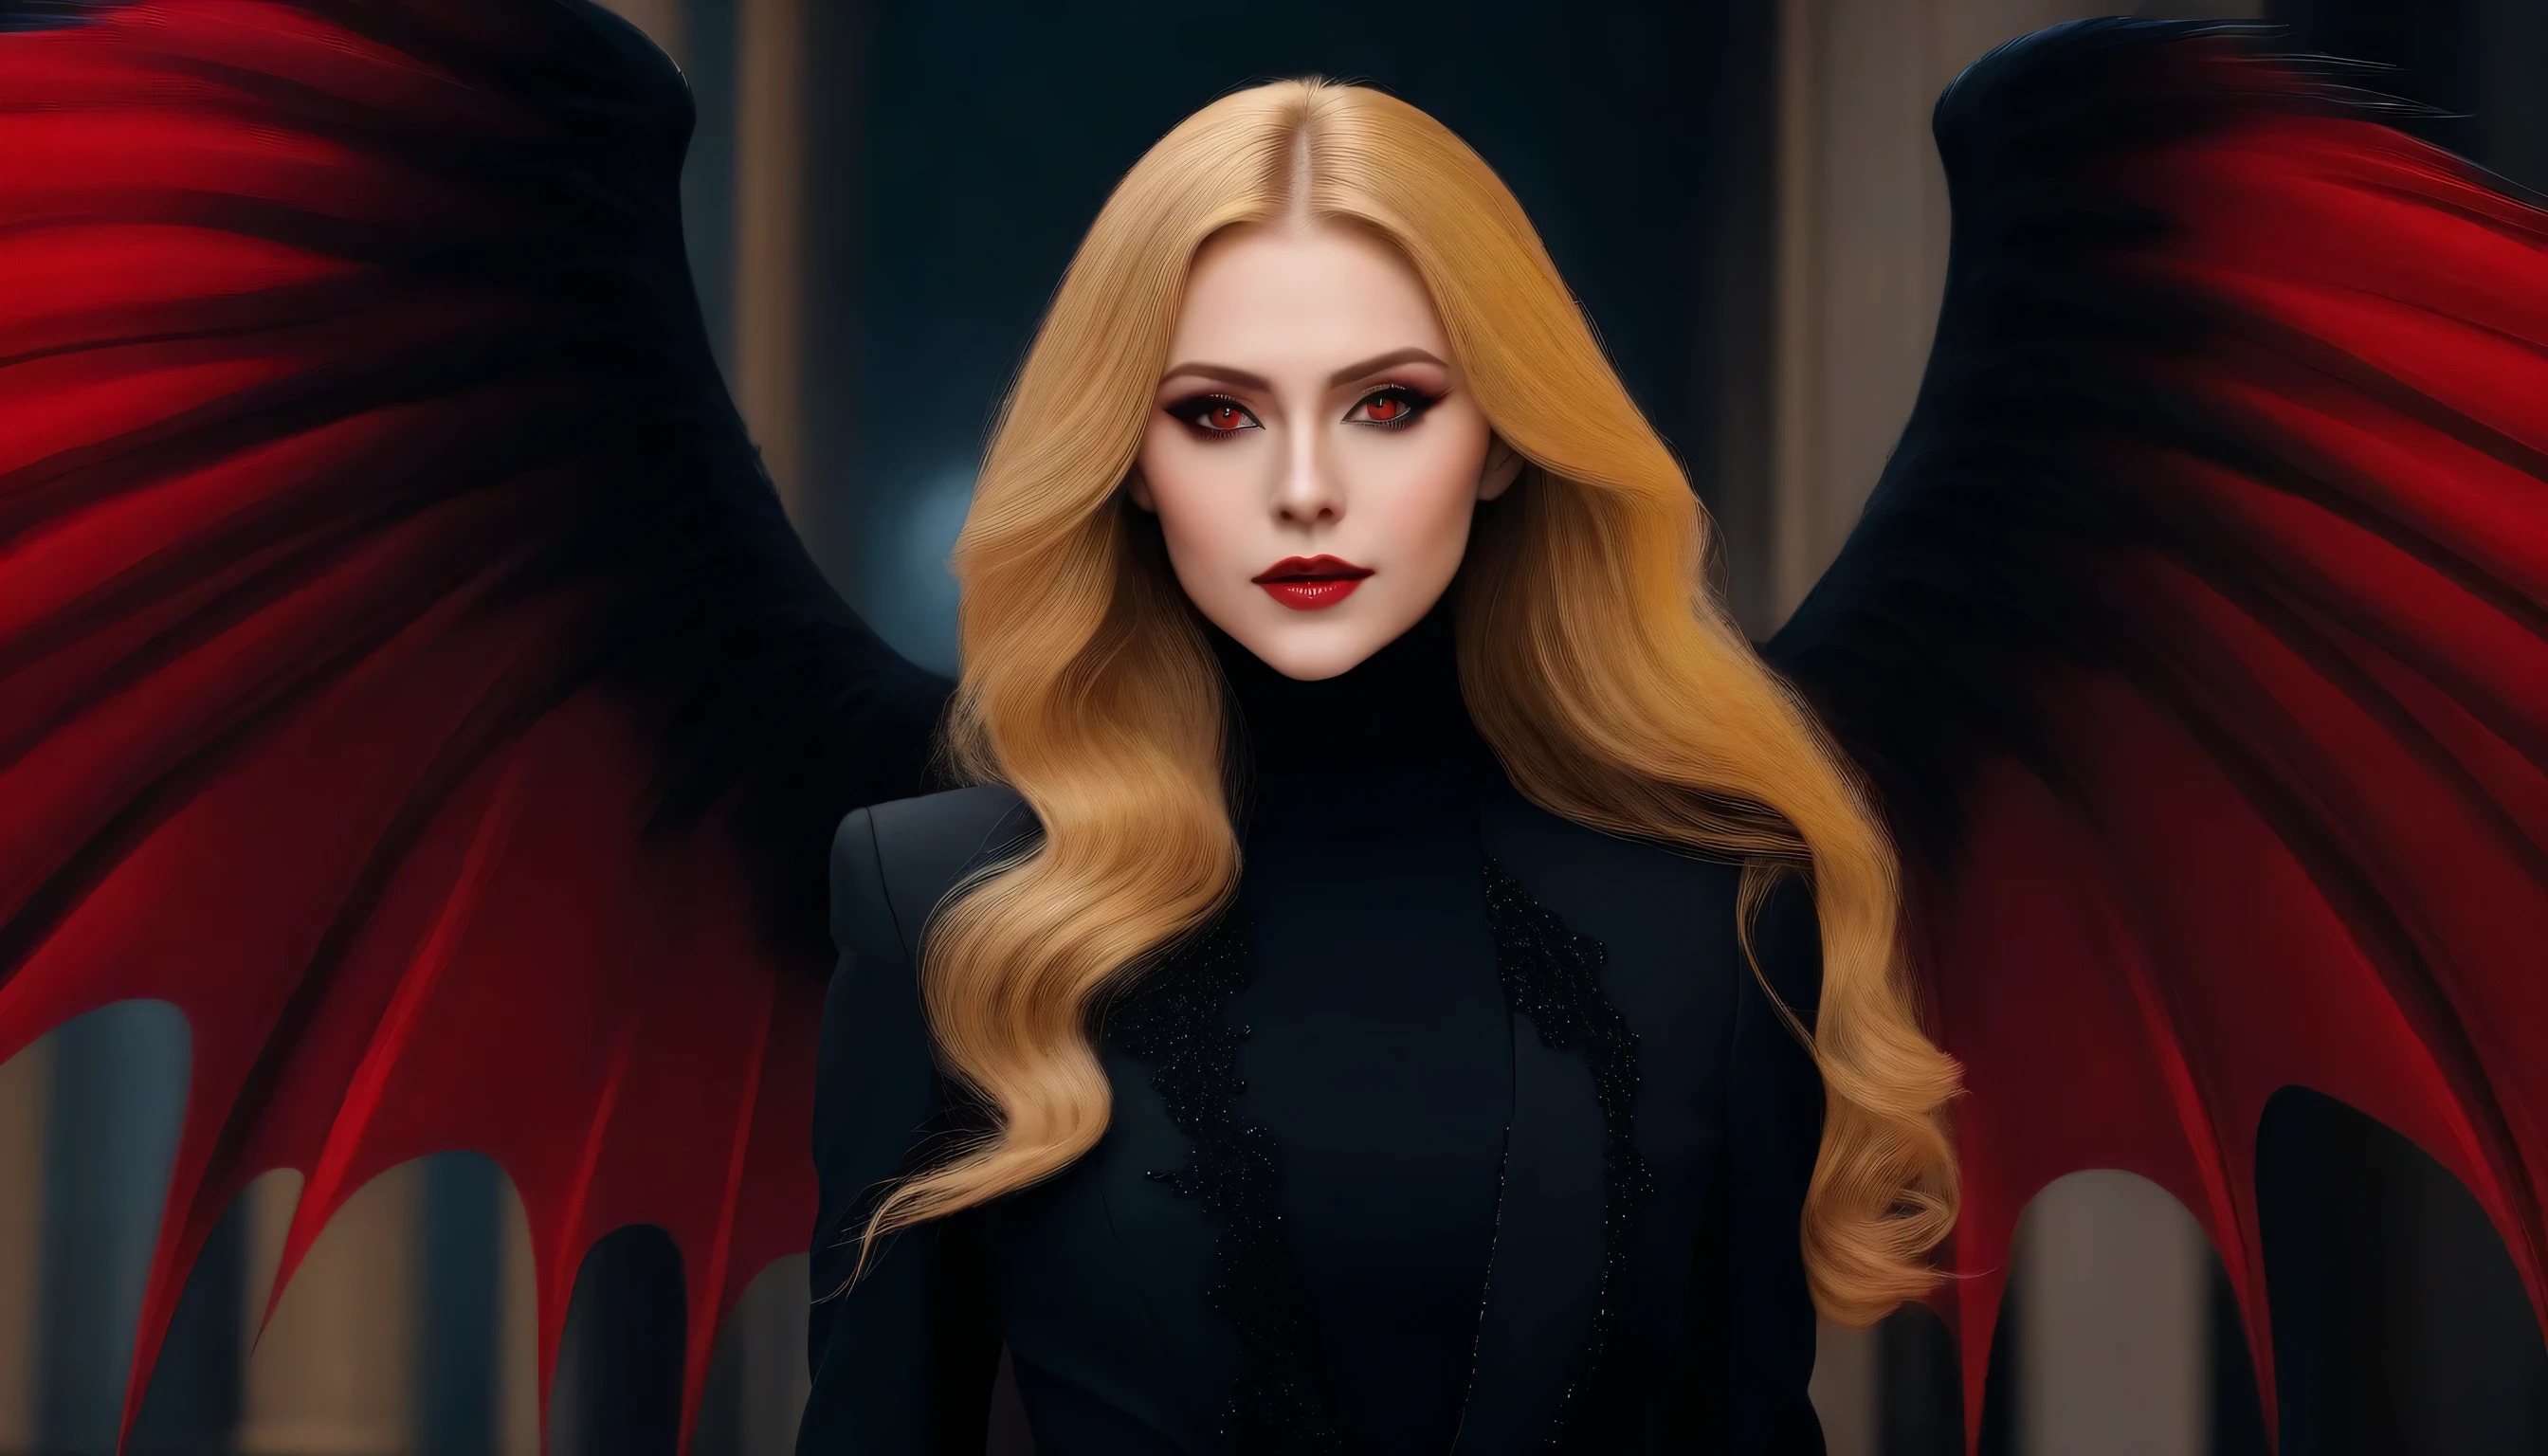 Only 1 woman, Very handsome woman, golden hair with long hair style, red eyes, wear black suit and black wings, vampire vibes